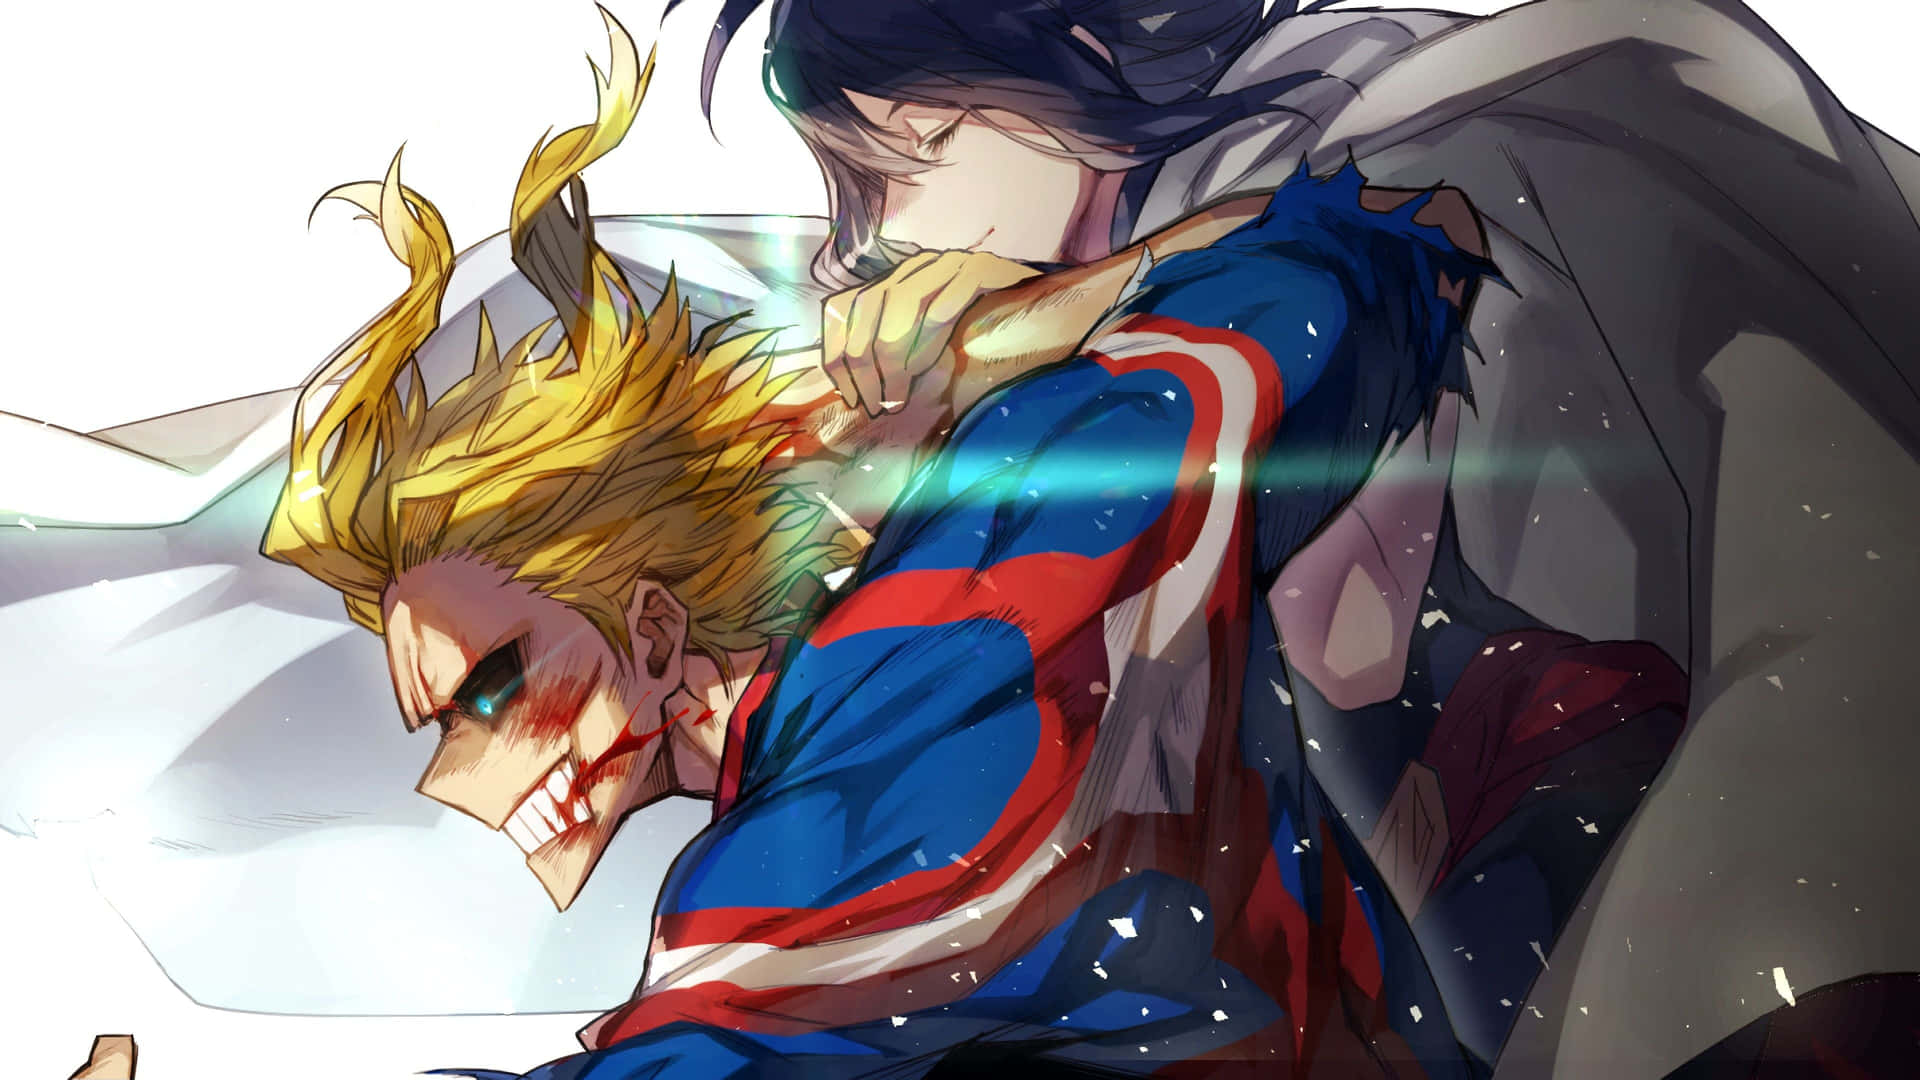 Imagende All Might Herido.